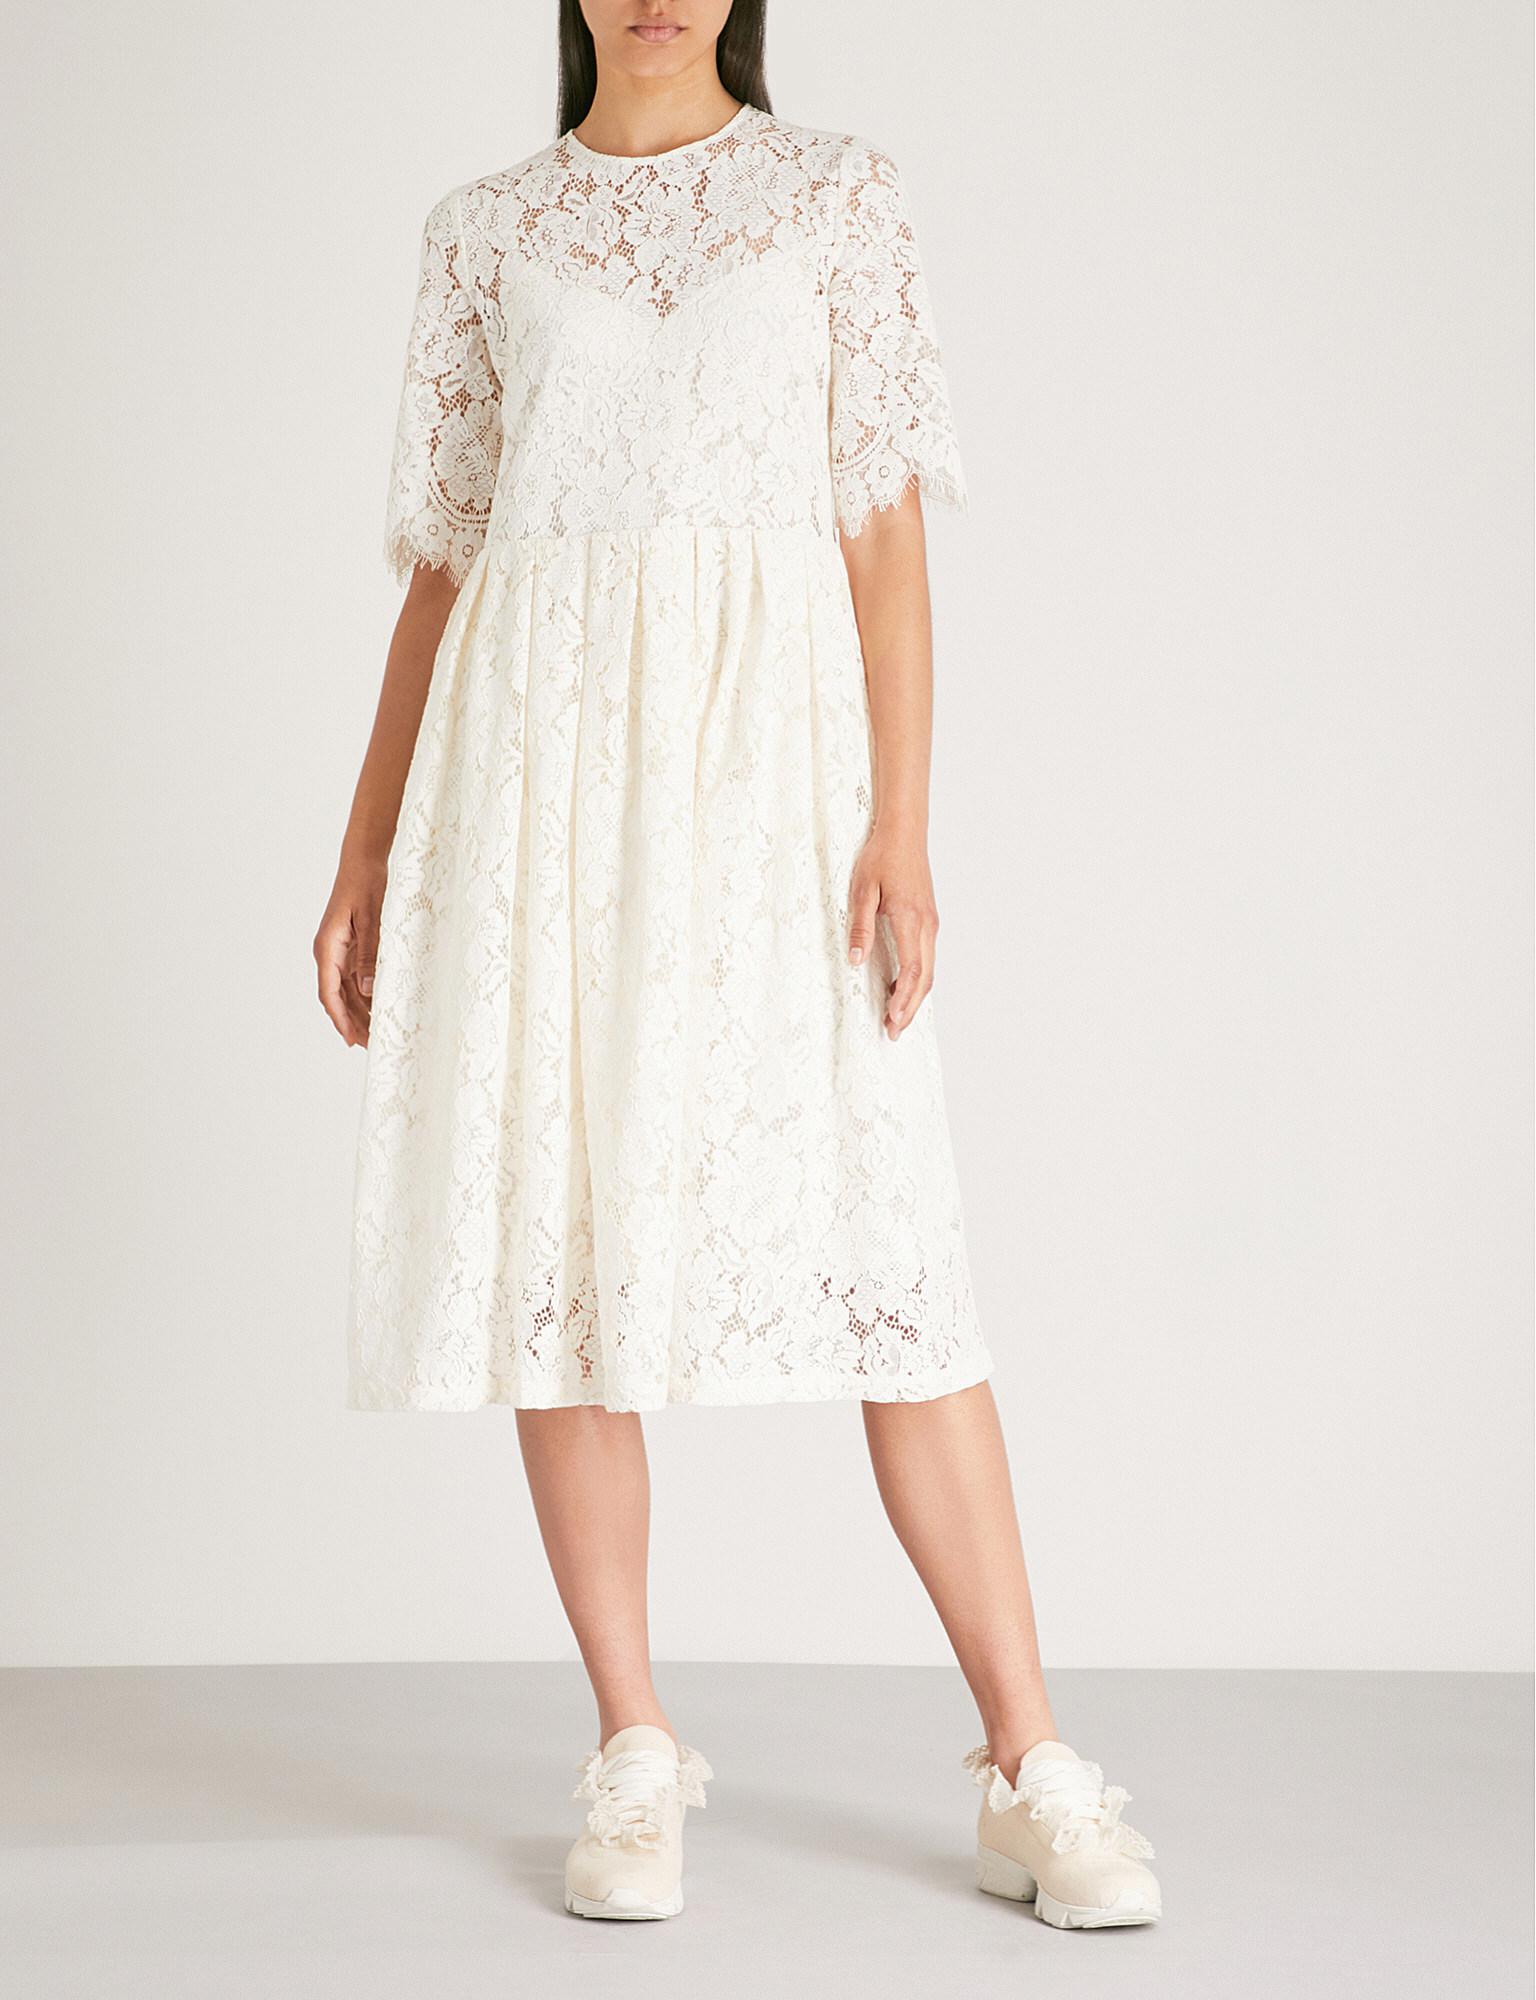 Ganni Jerome Lace Dress in White - Lyst